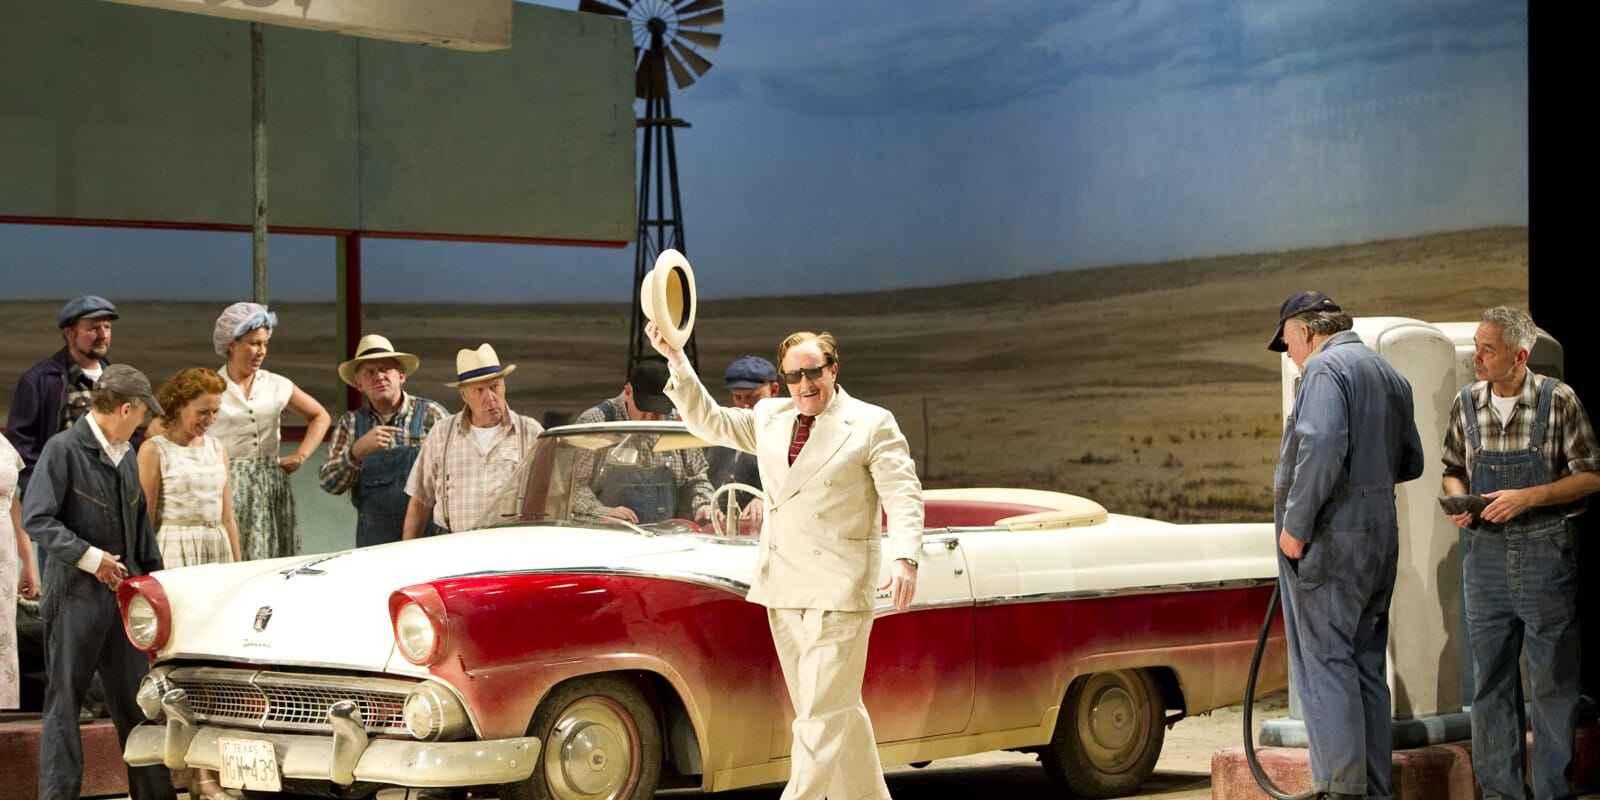 A man in a cream suit waves his hat in the air while standing by a red car